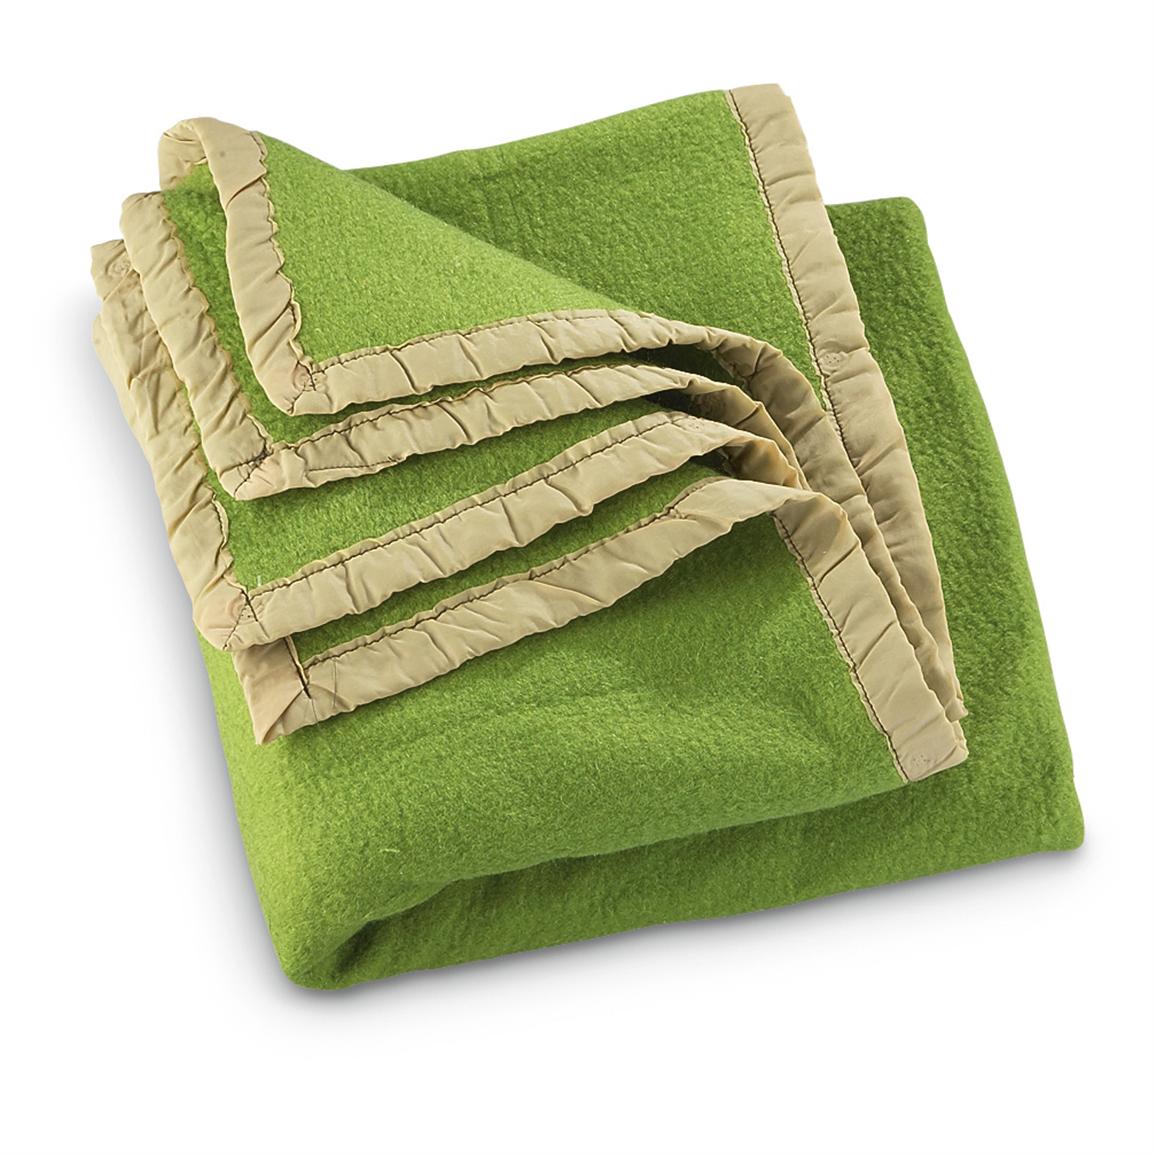 Wool Army Blankets For Sale - Army Military